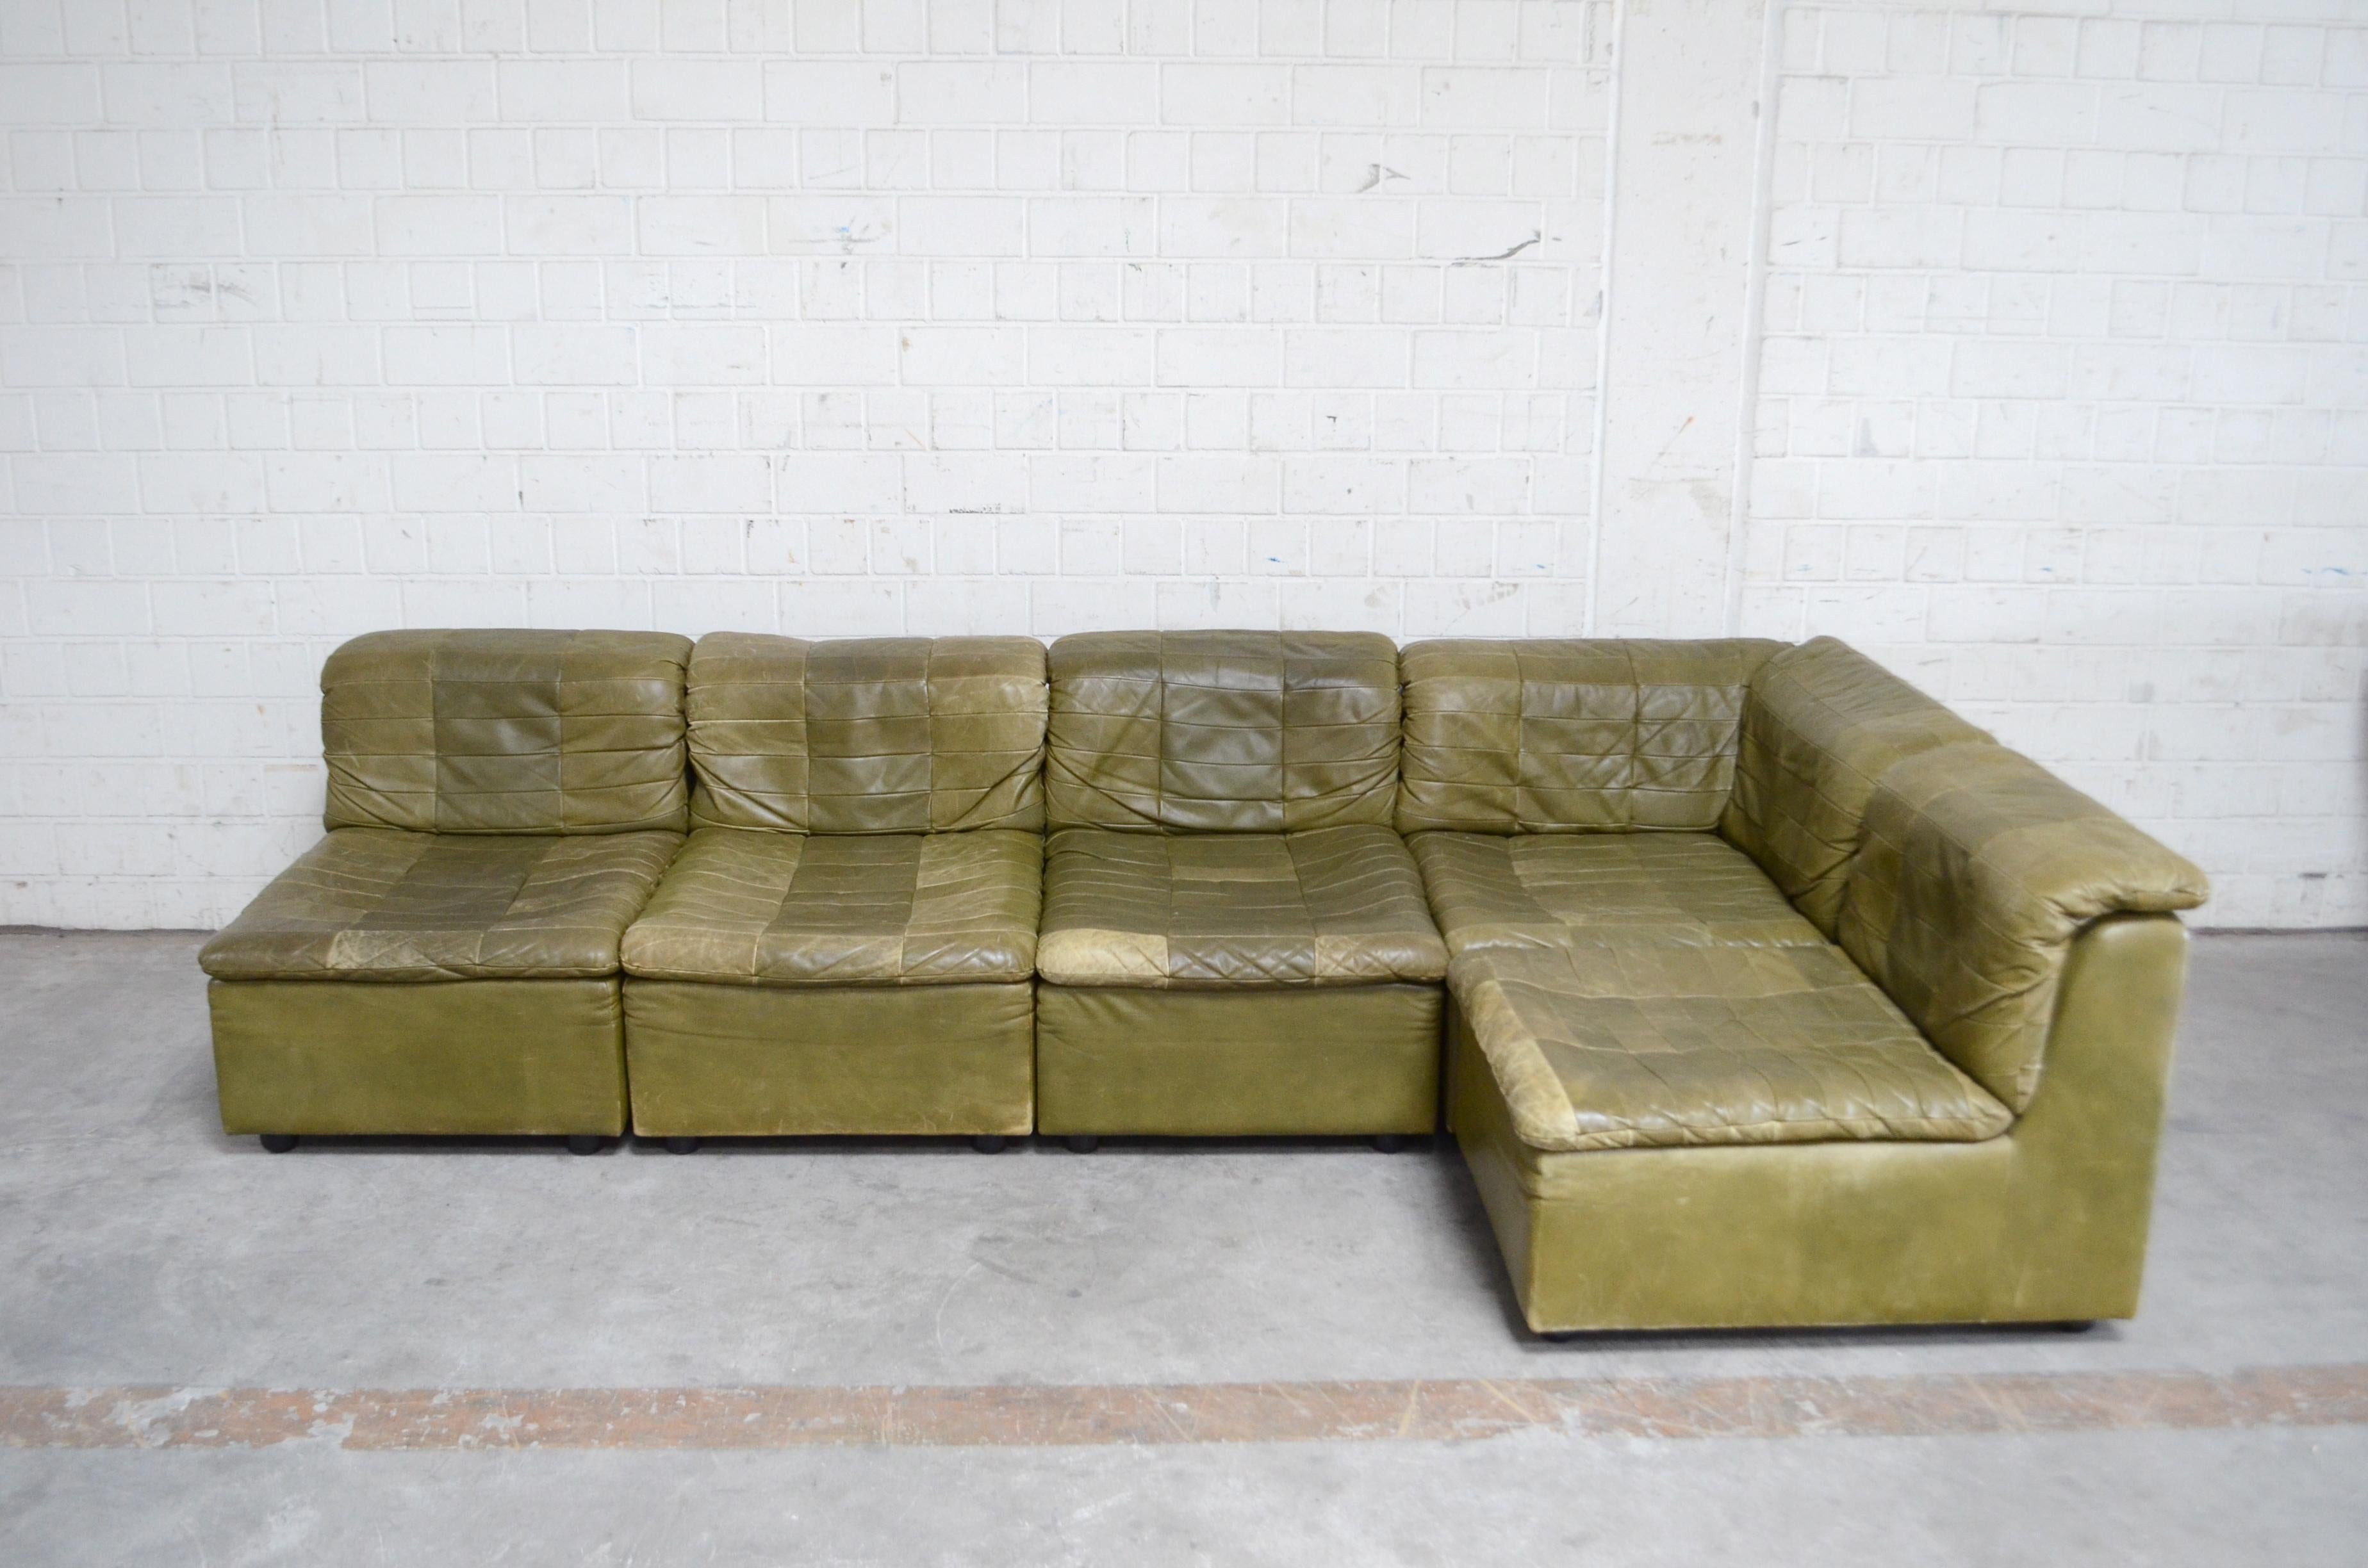 Dreipunkt International module leather sofa.
German design from Dreipunkt from the 1970s.
Aniline leather in olive green classic patchwork design.
It consists 5 elements. 1 corner and 4 m single element
Originally on 1 chair there were armrests